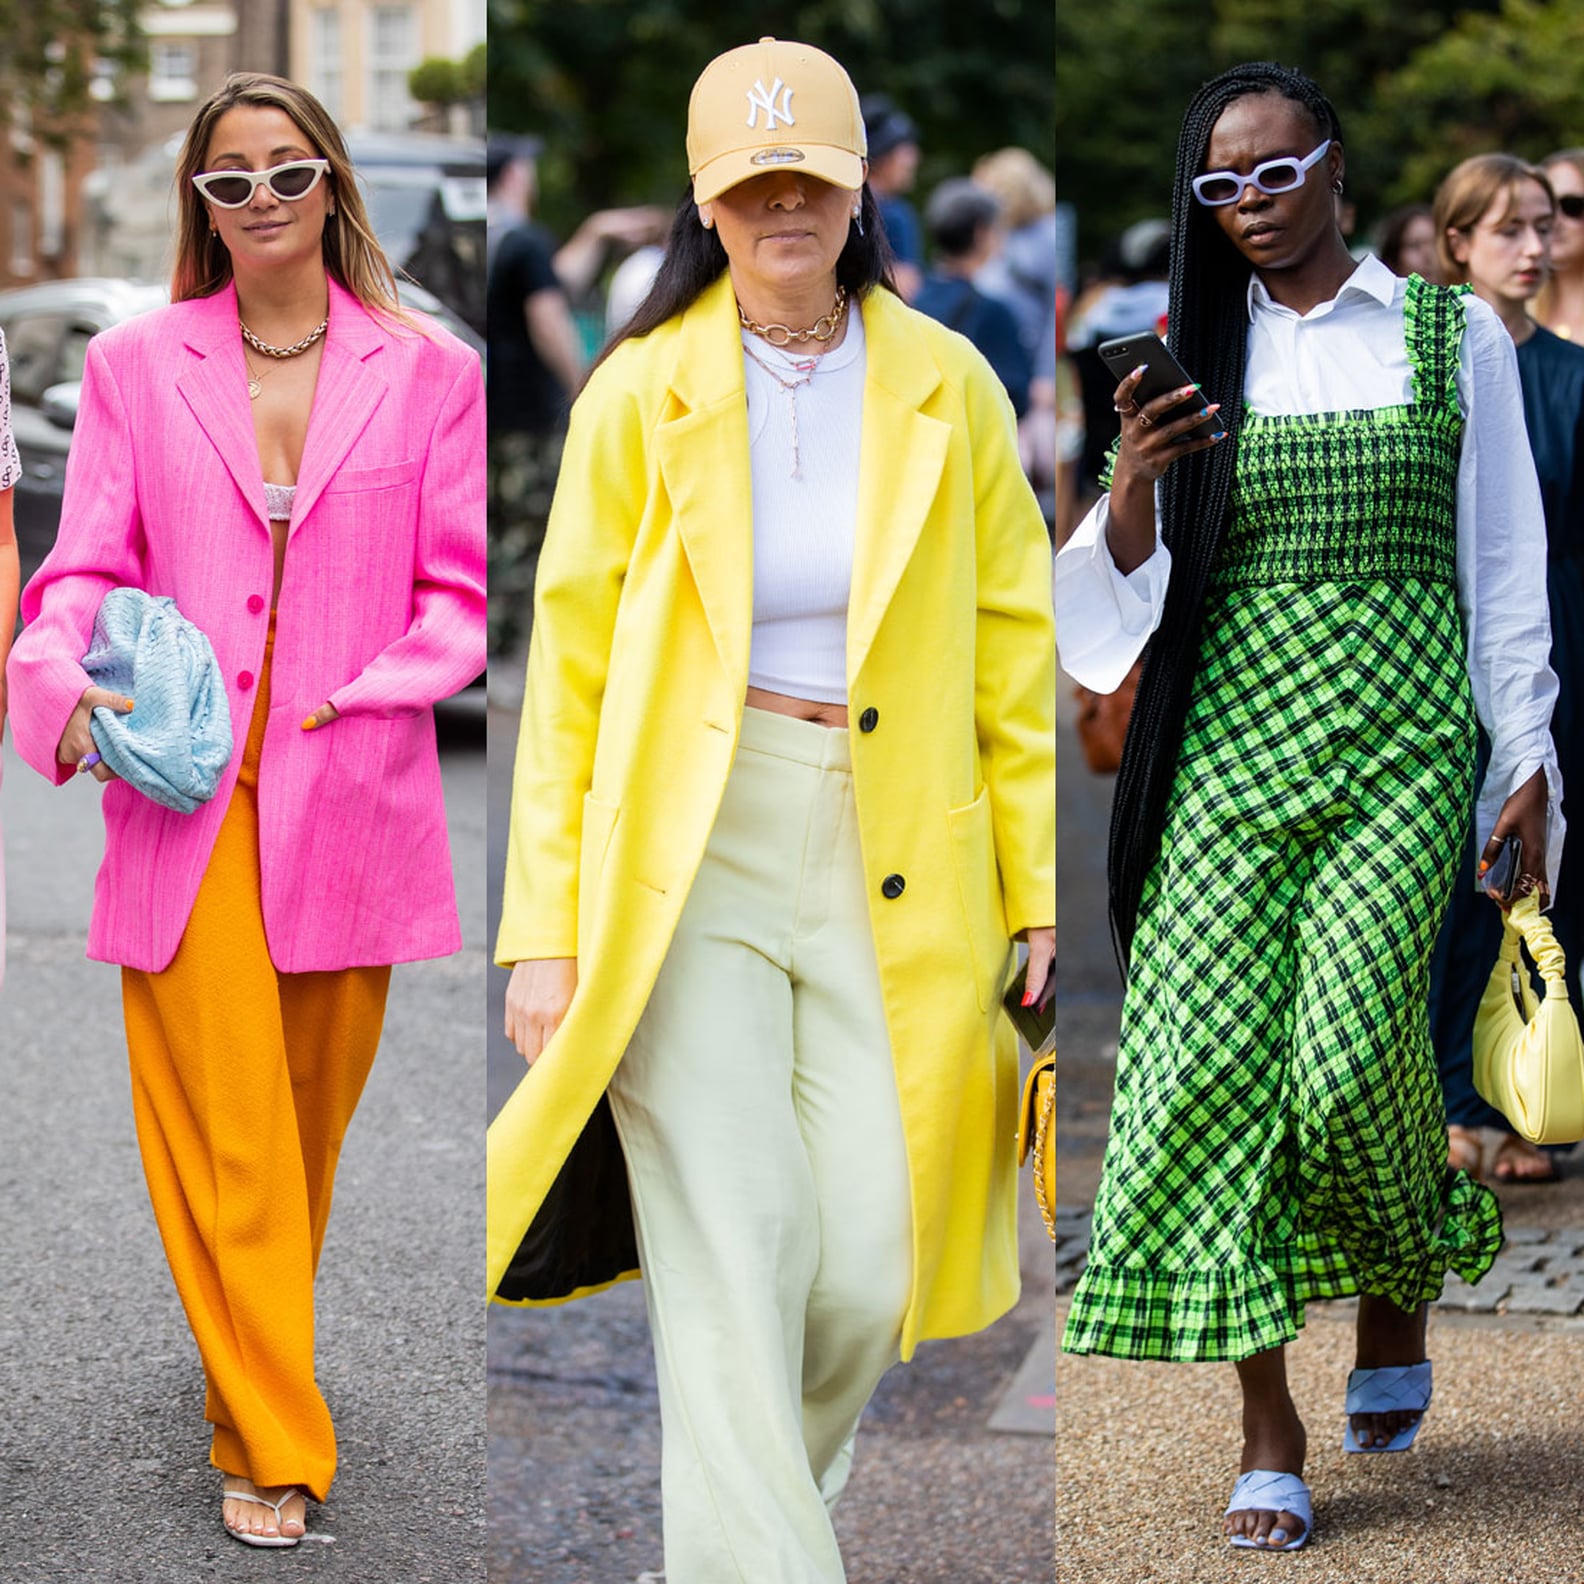 Street Style Is Full of Bright Colors at London Fashion Week | POPSUGAR ...